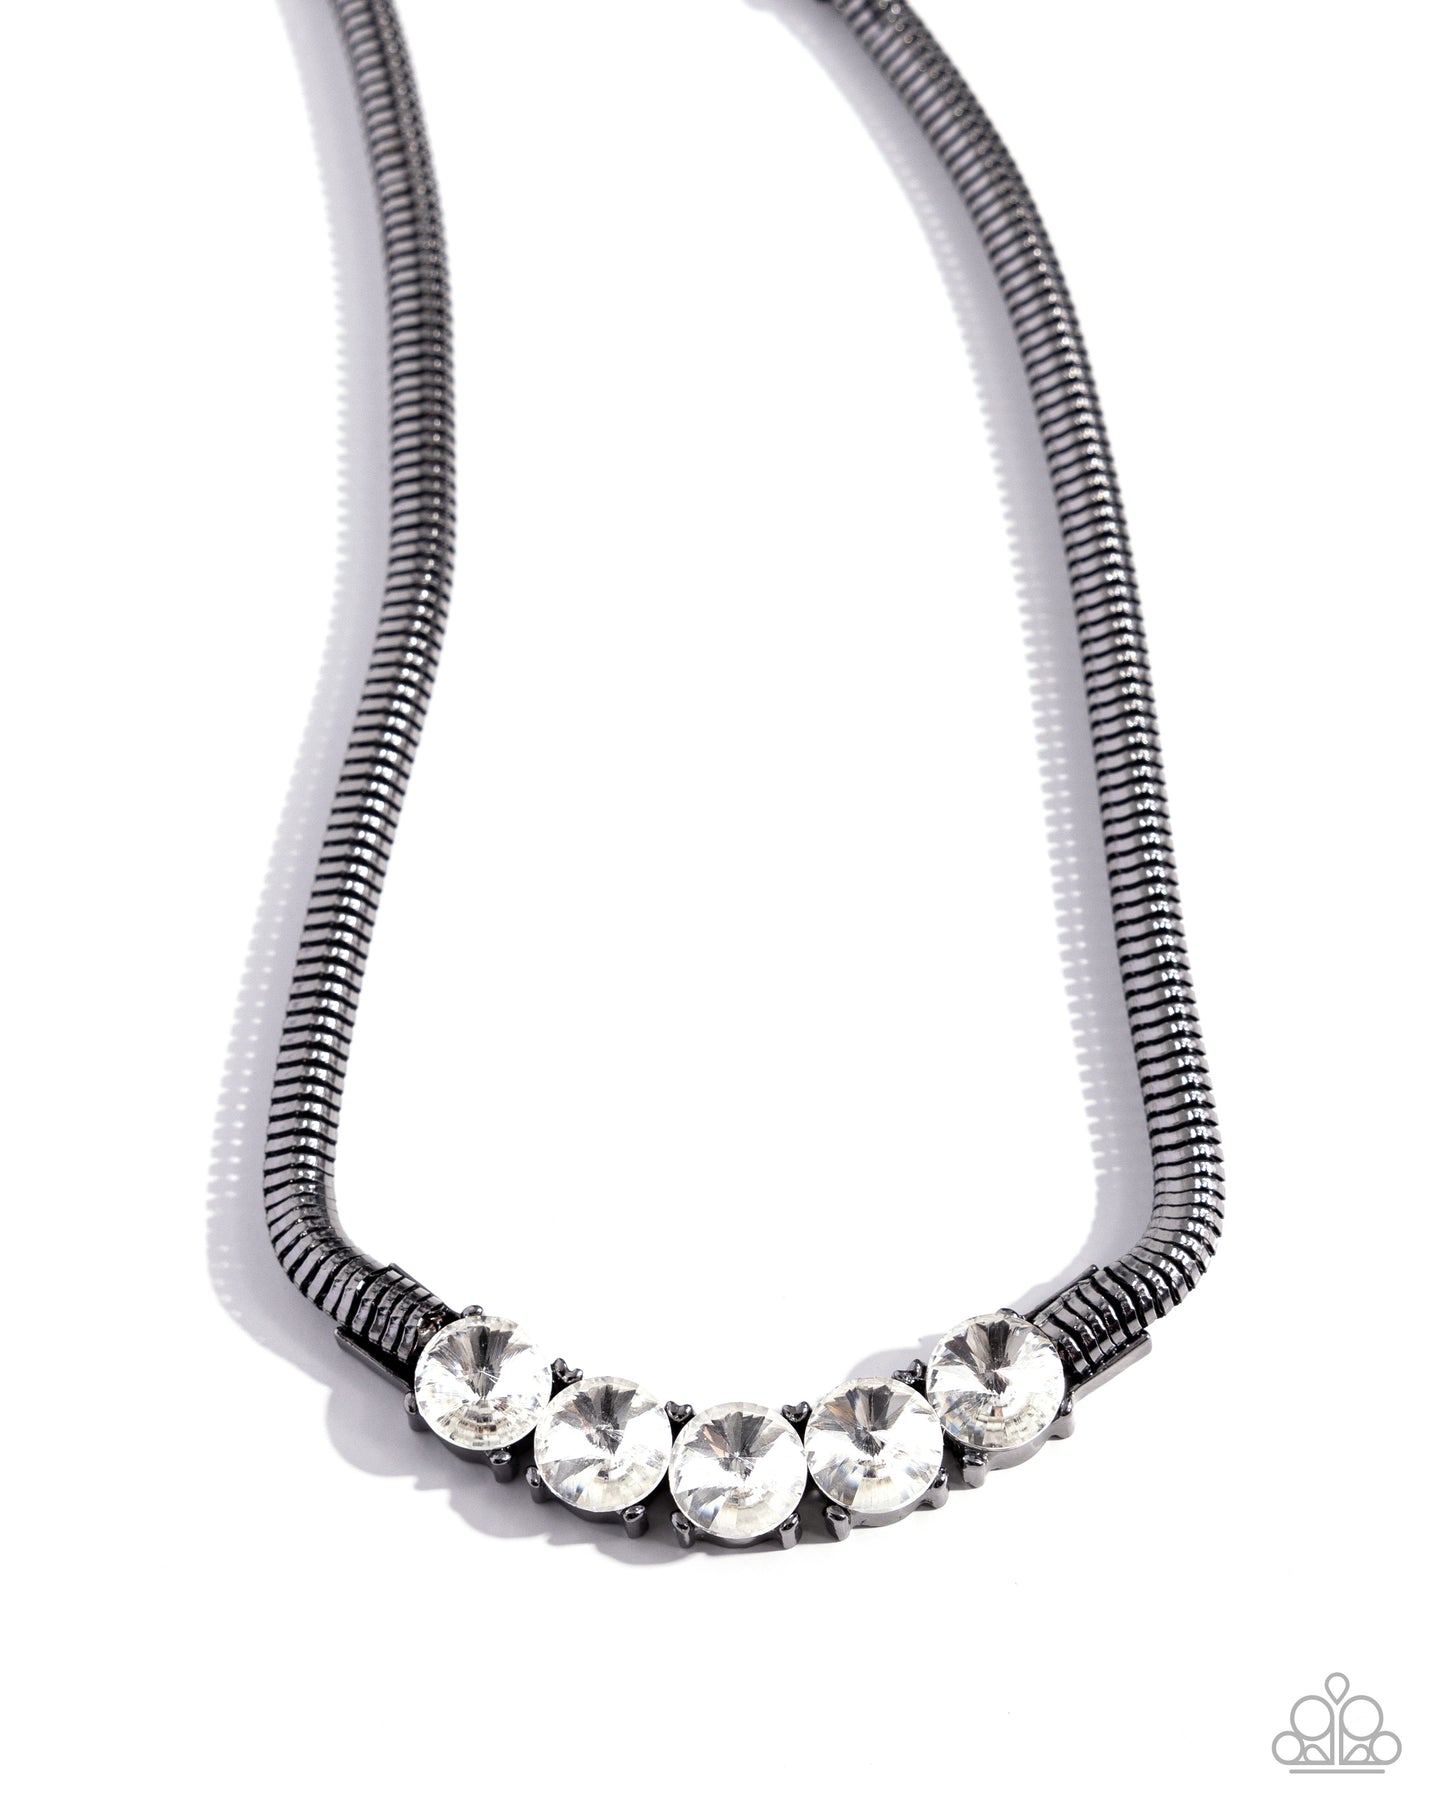 <p>Pronged in place along the center of a thick gunmetal chain, faceted white gems twinkle below the neckline for a glittery, grungy look. Features an adjustable clasp closure.</p> <p><i> Sold as one individual necklace. Includes one pair of matching earrings.</i></p>